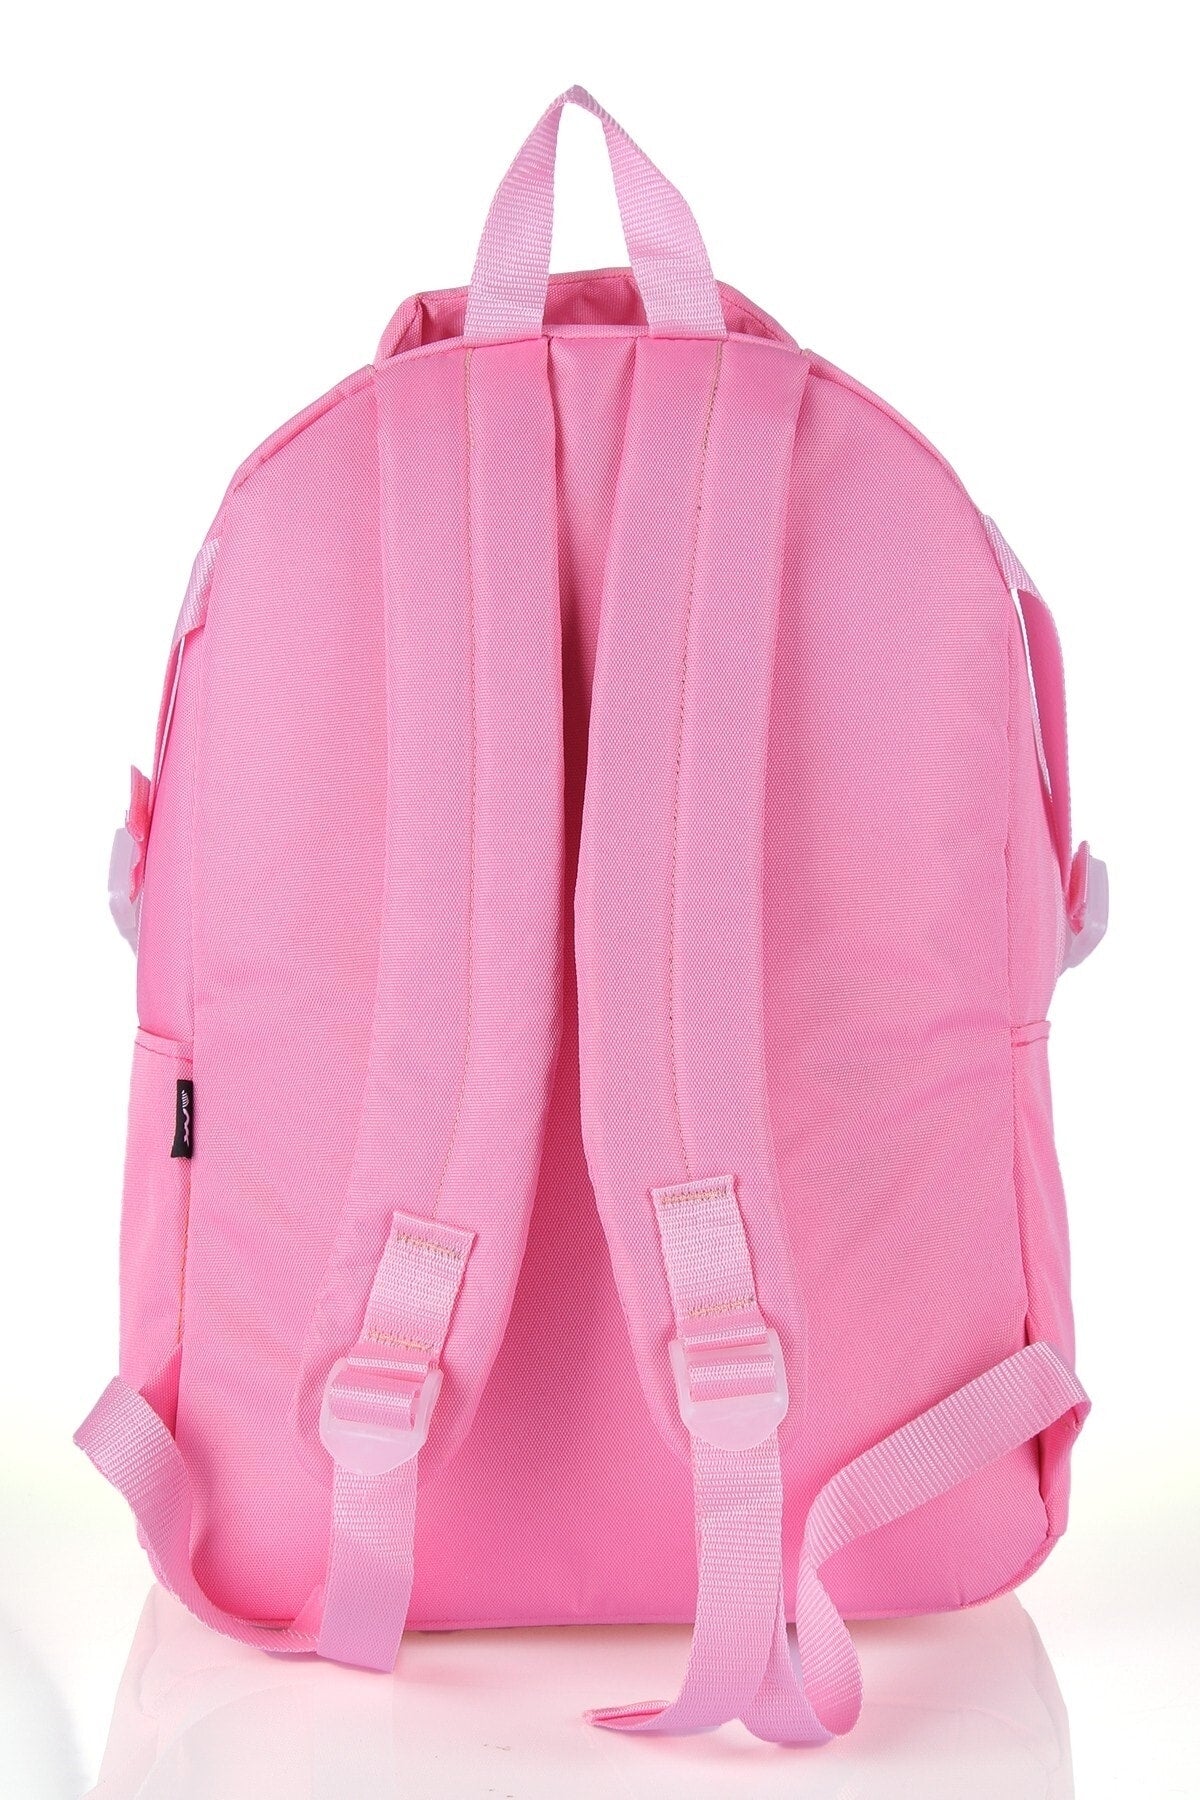 Hkn 9012 Primary School Backpack School Bag Multi Compartment Pink